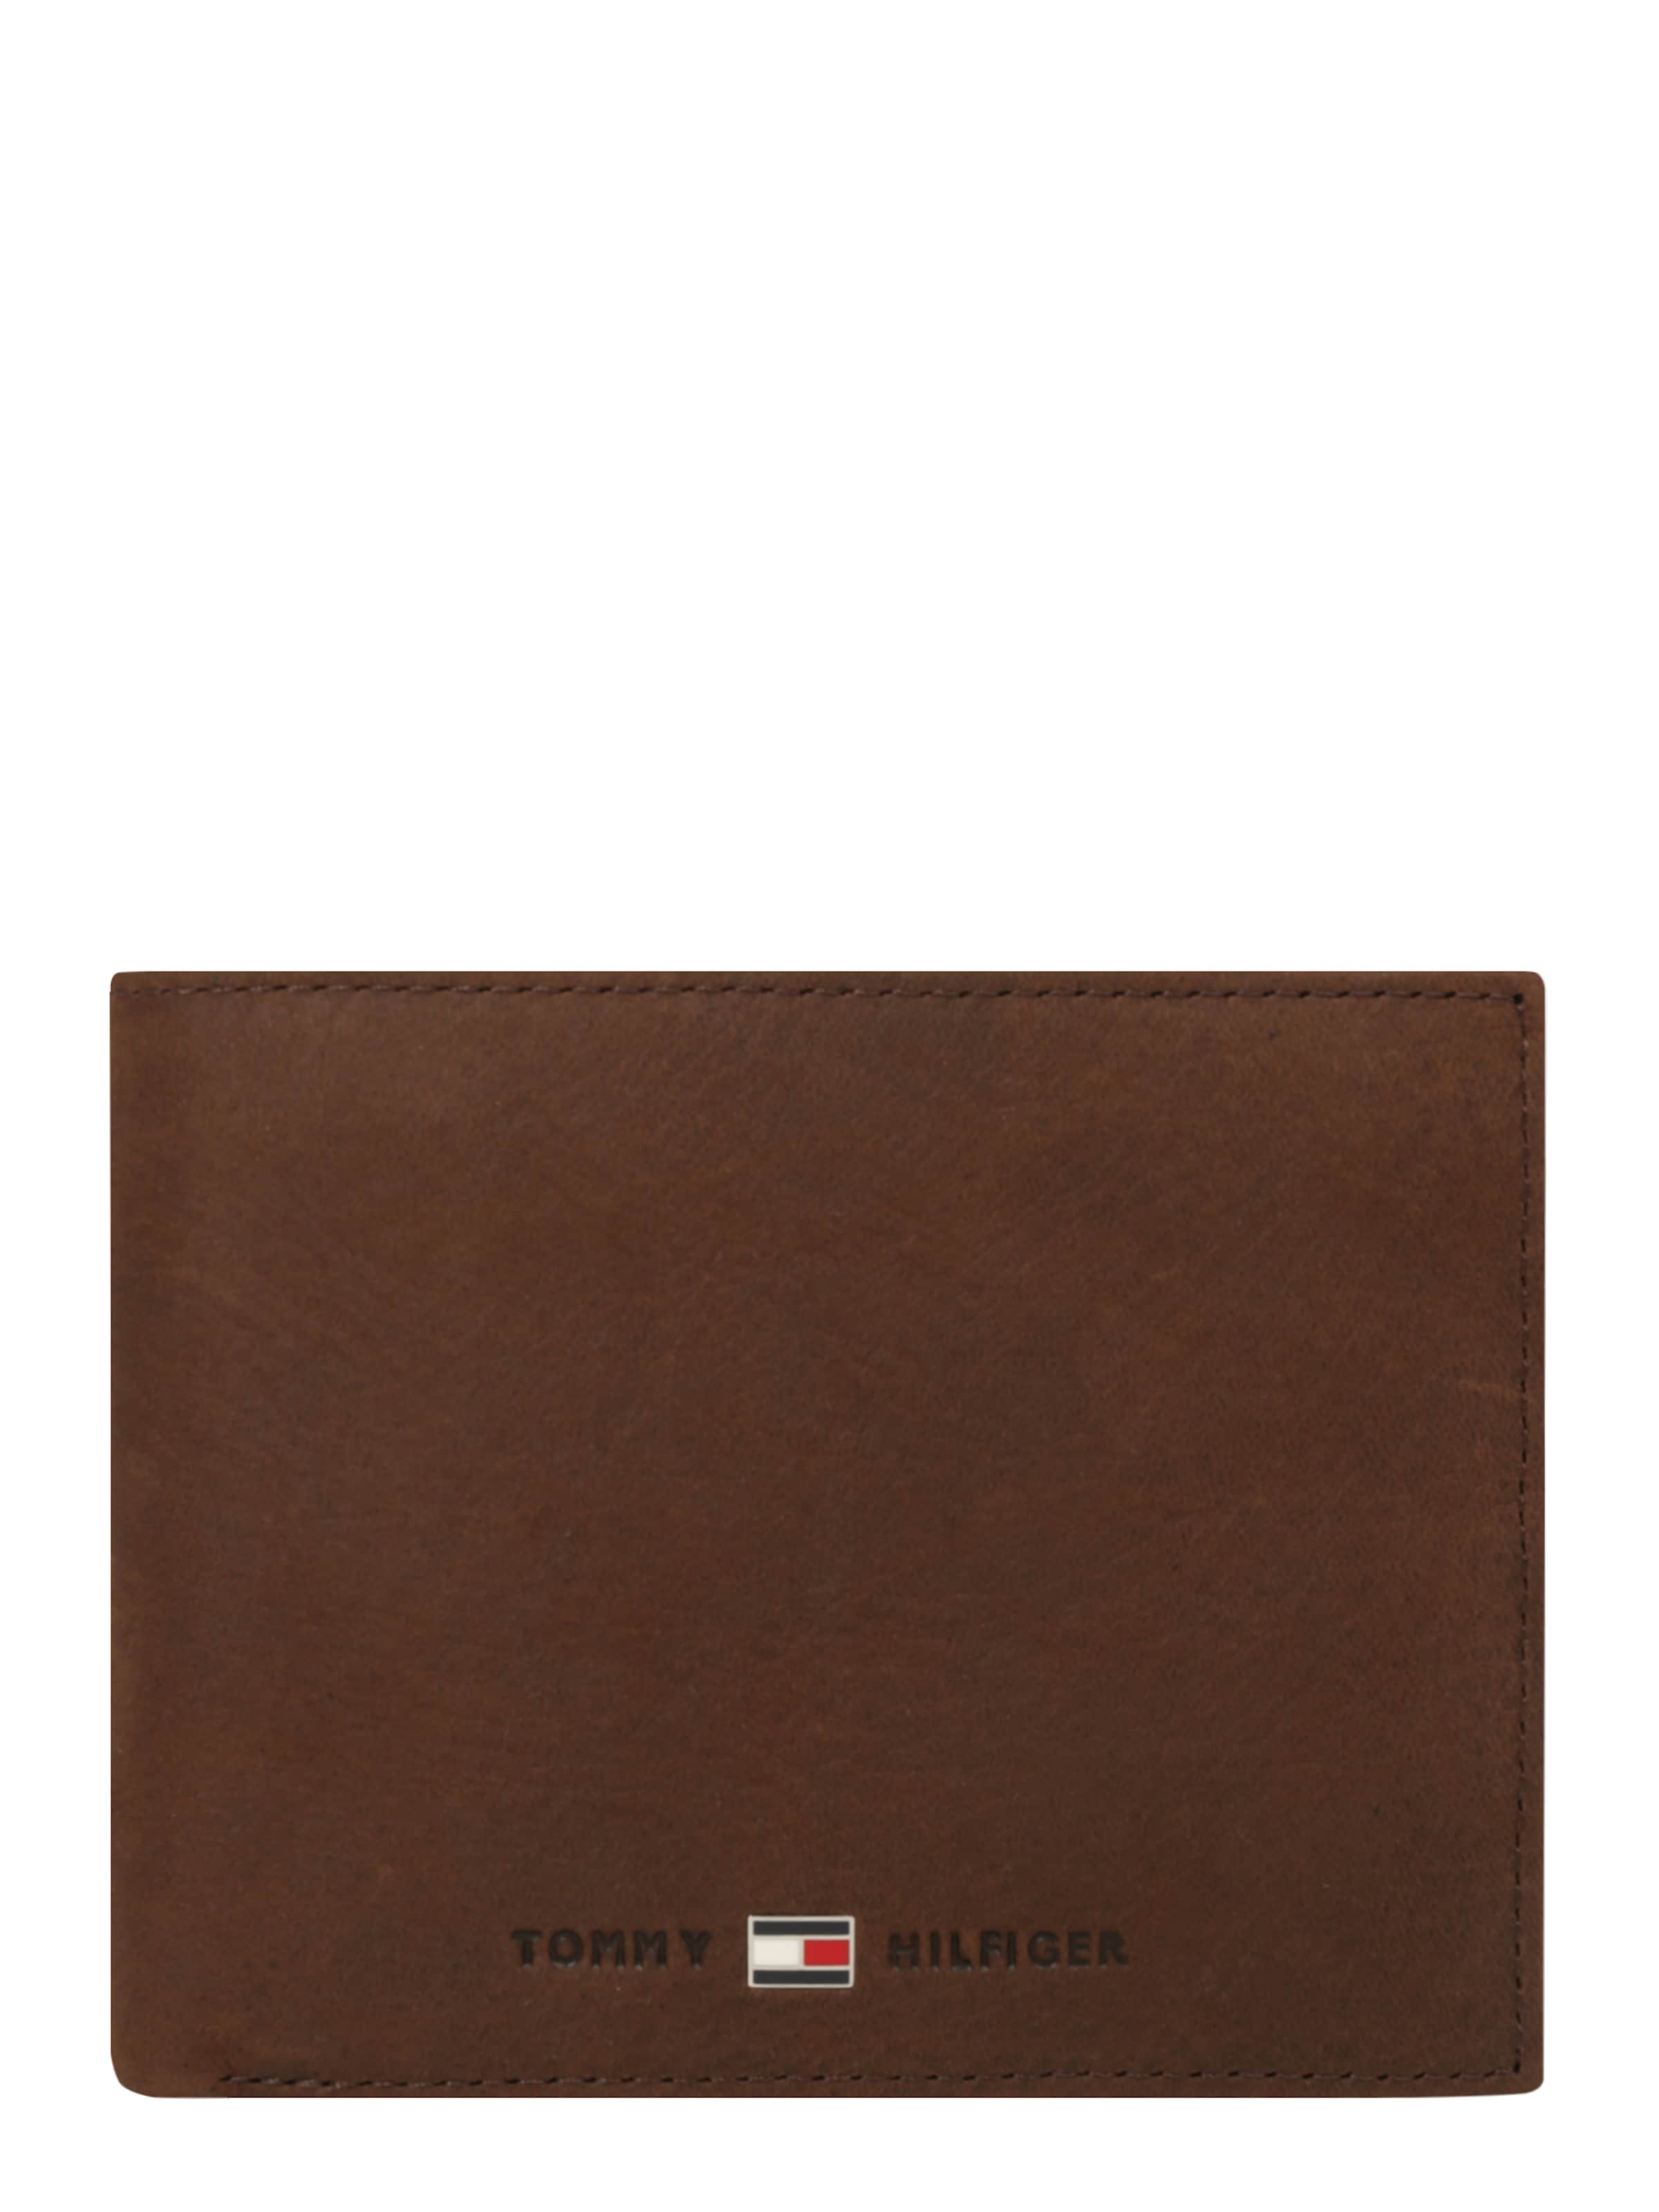 Men Wallets & cases | TOMMY HILFIGER Wallet 'Johnson' in Chocolate - MZ86923